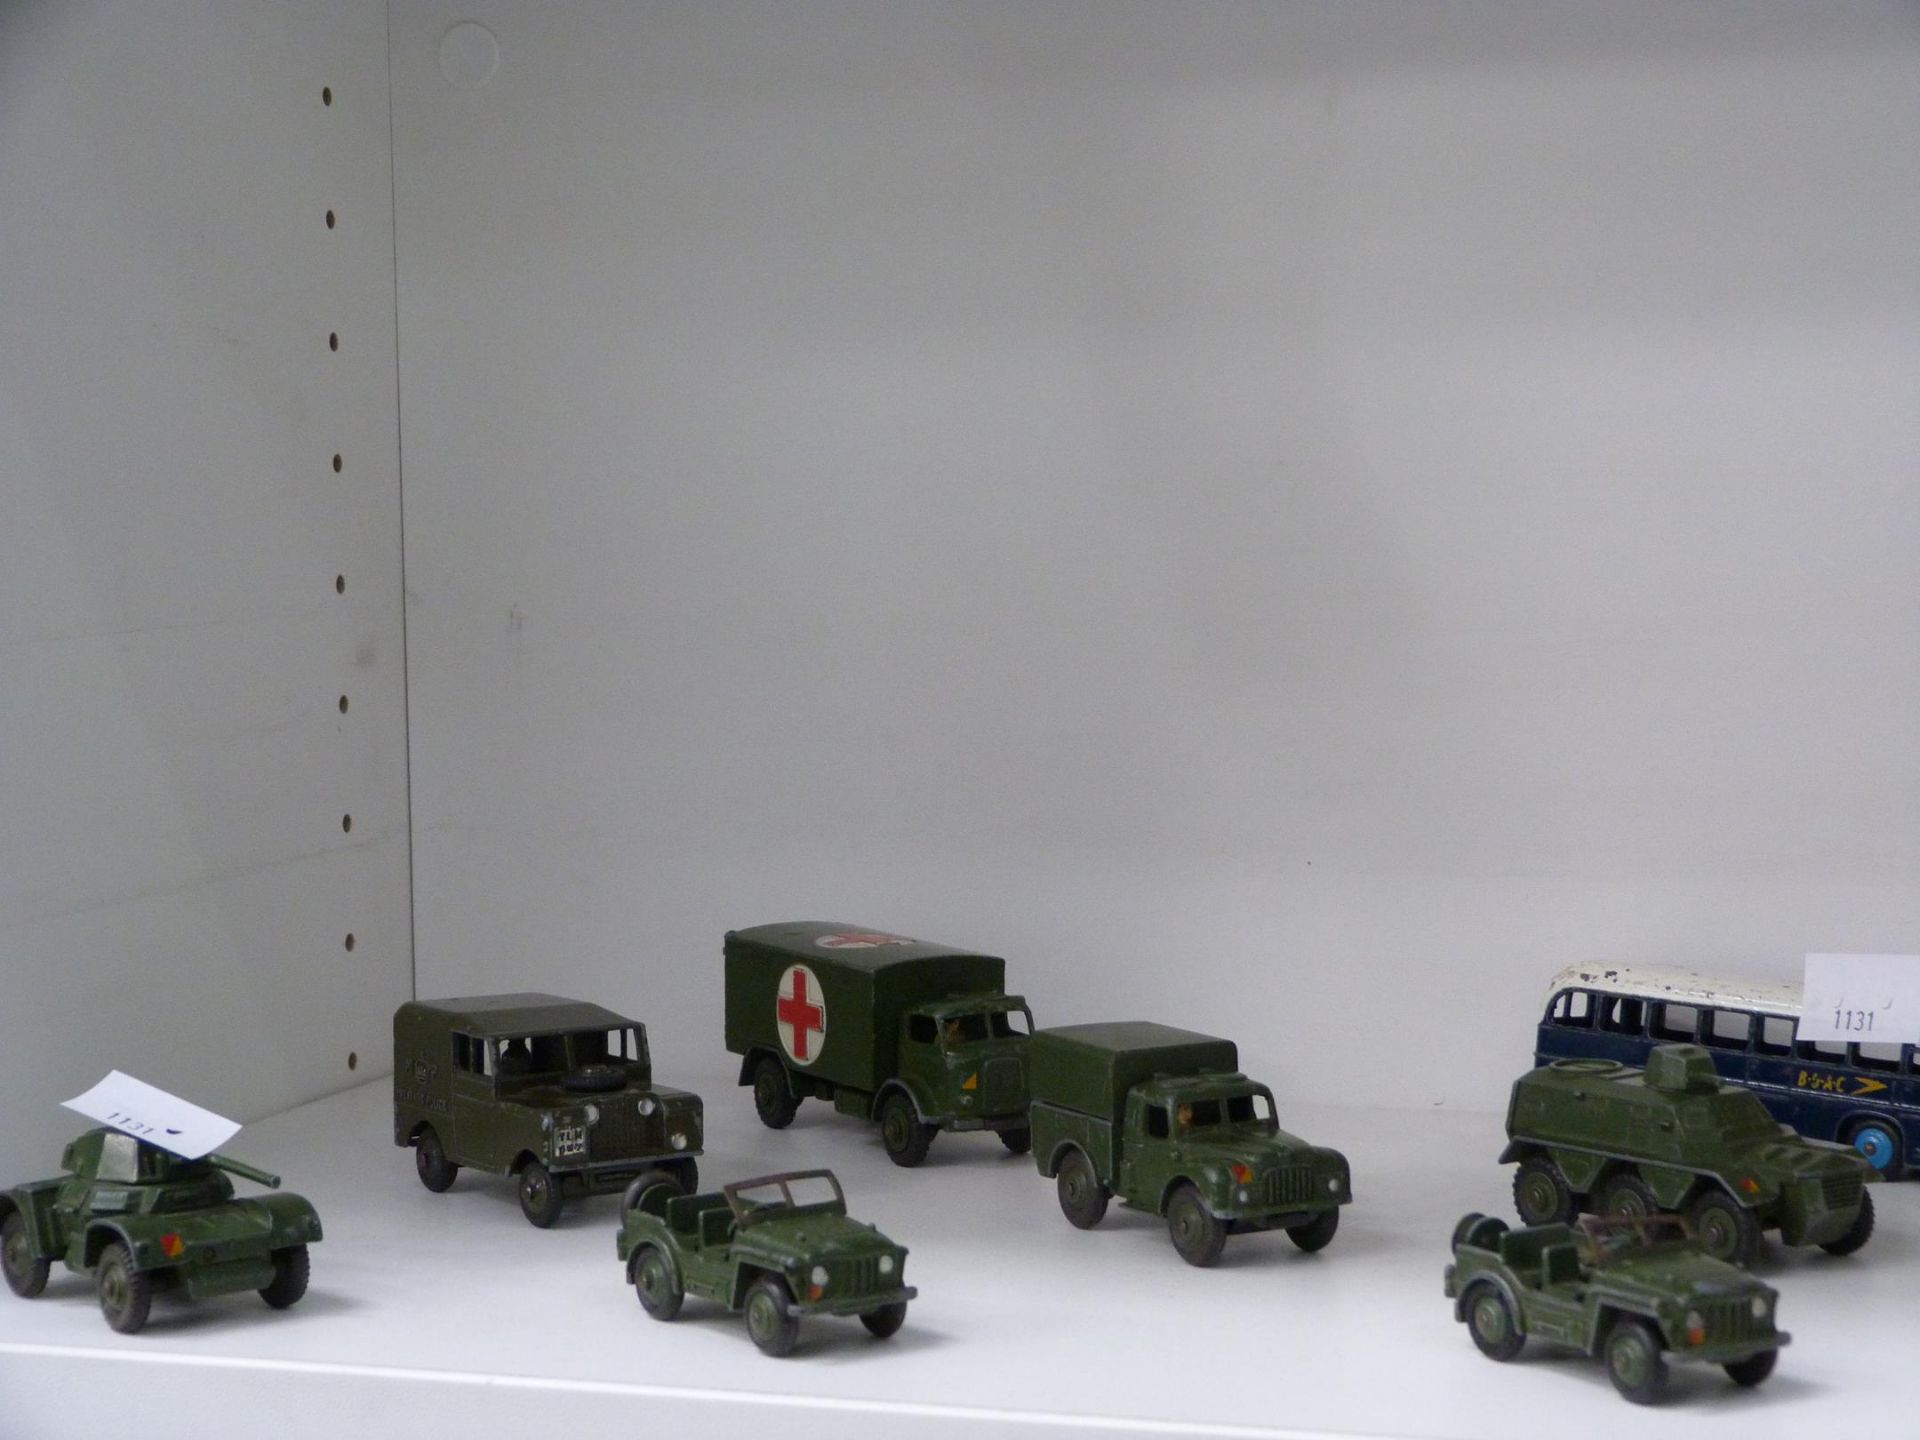 A shelf to feature a selection of Military Dinky Toys, a B.O.A.C Dinky Bus, Plastic Toy Soldiers and